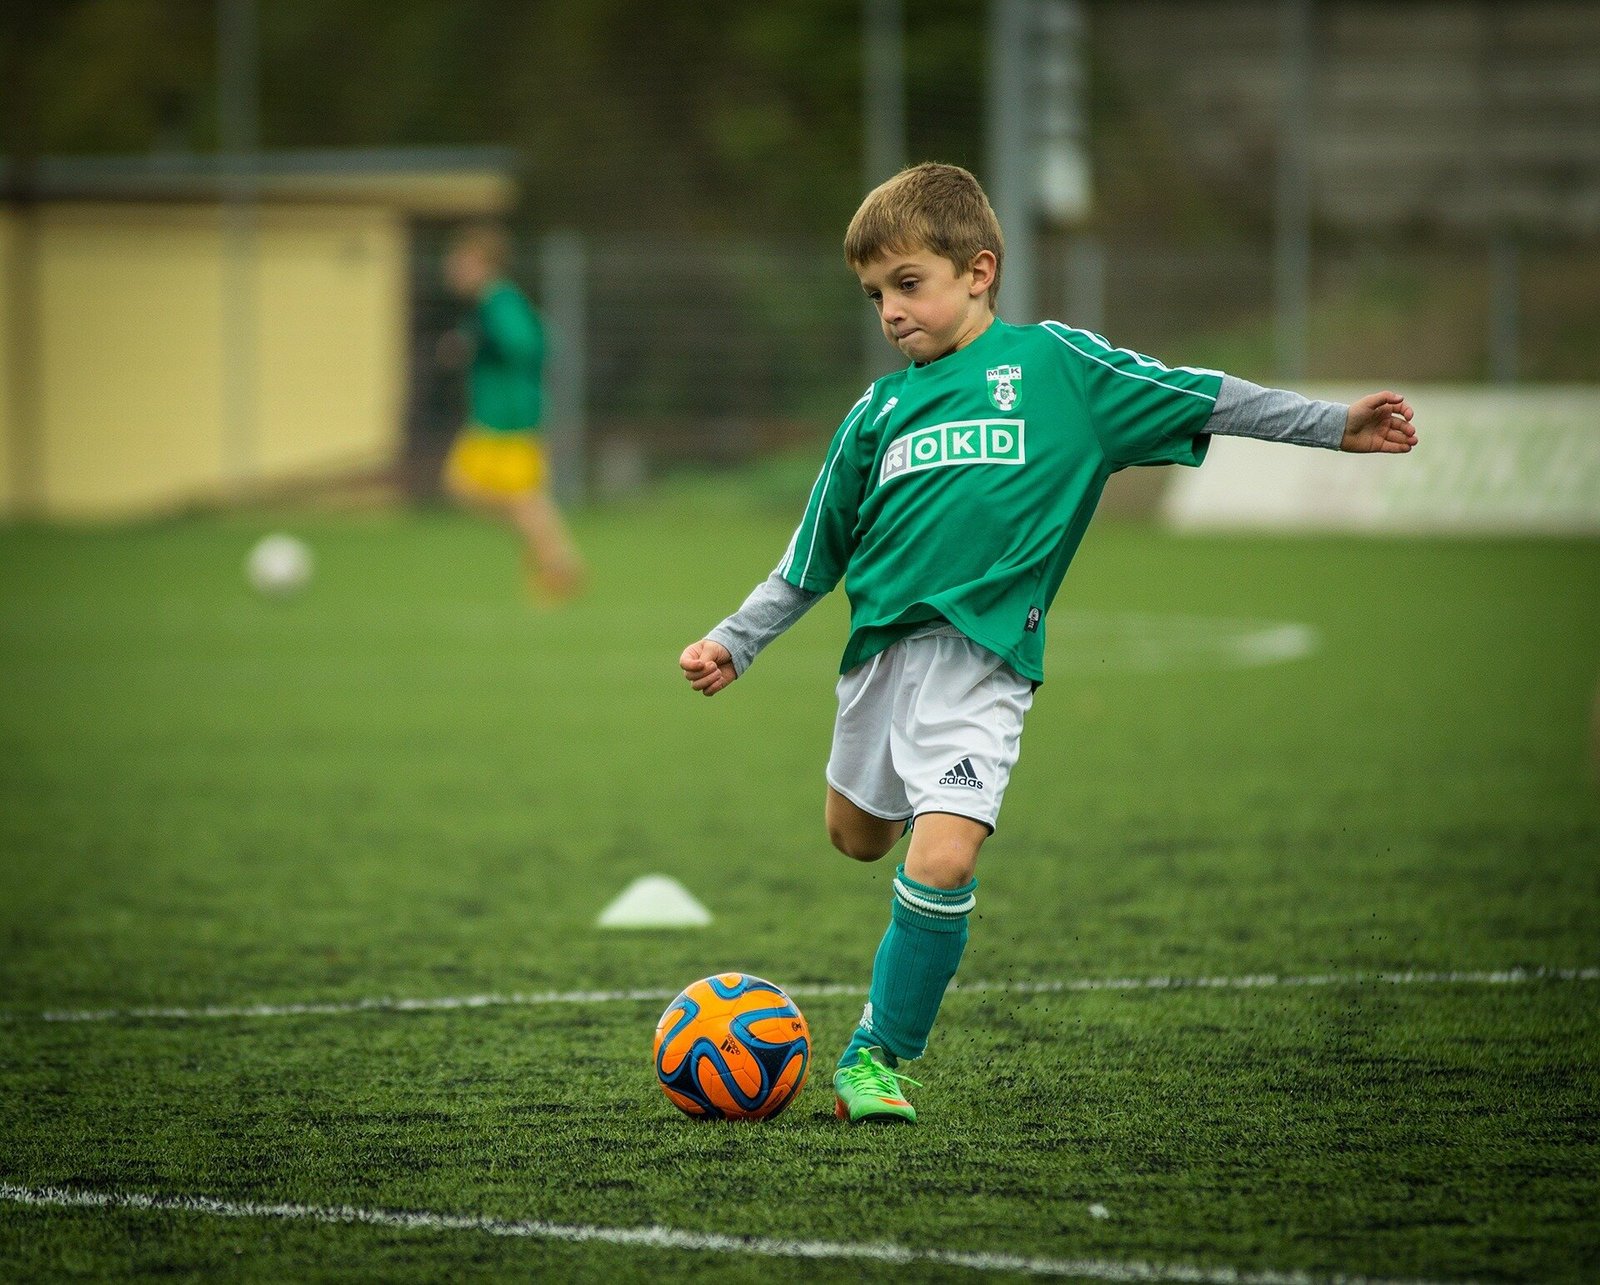 The problem with seeing young sportspeople as athletes first, children second